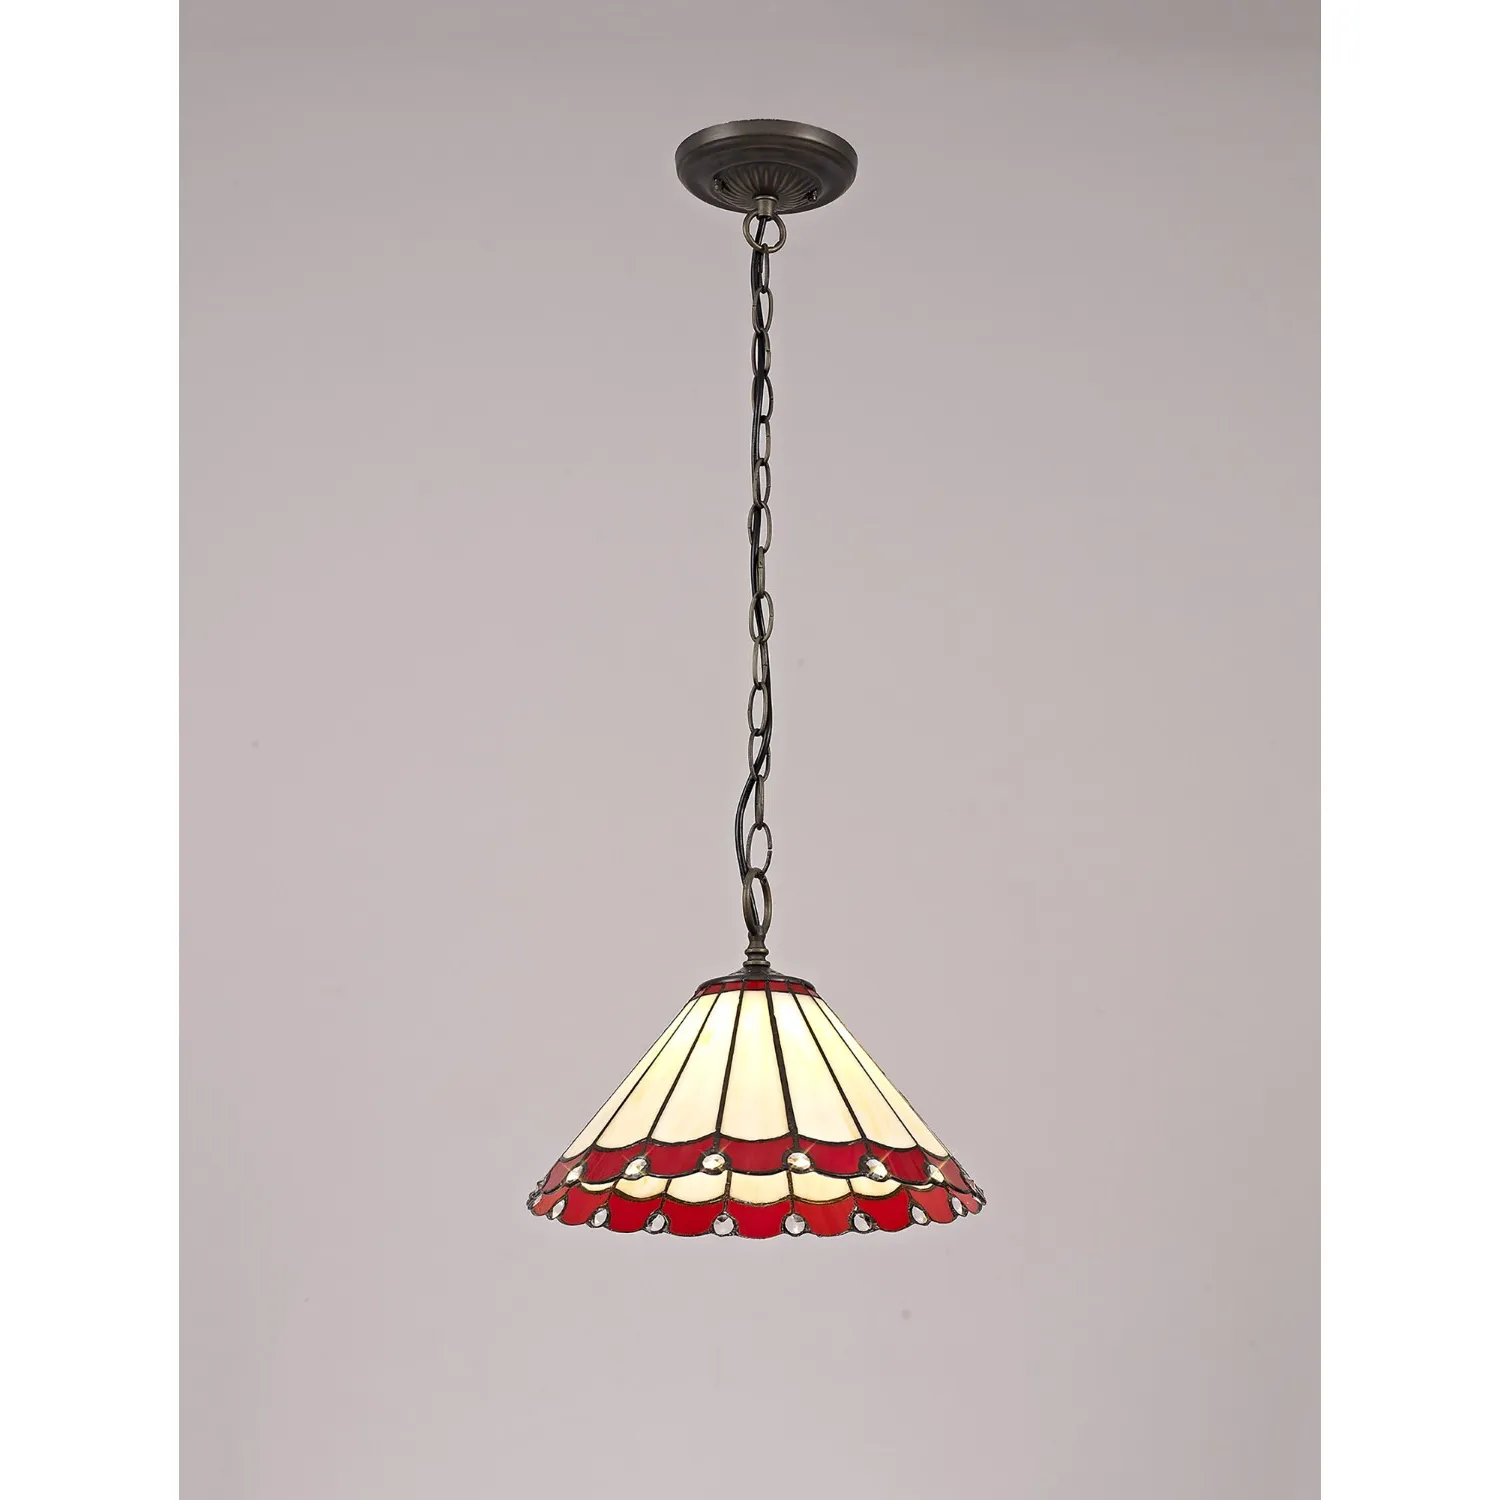 Ware 1 Light Downlighter Pendant E27 With 30cm Tiffany Shade, Red Cream Crystal Aged Antique Brass